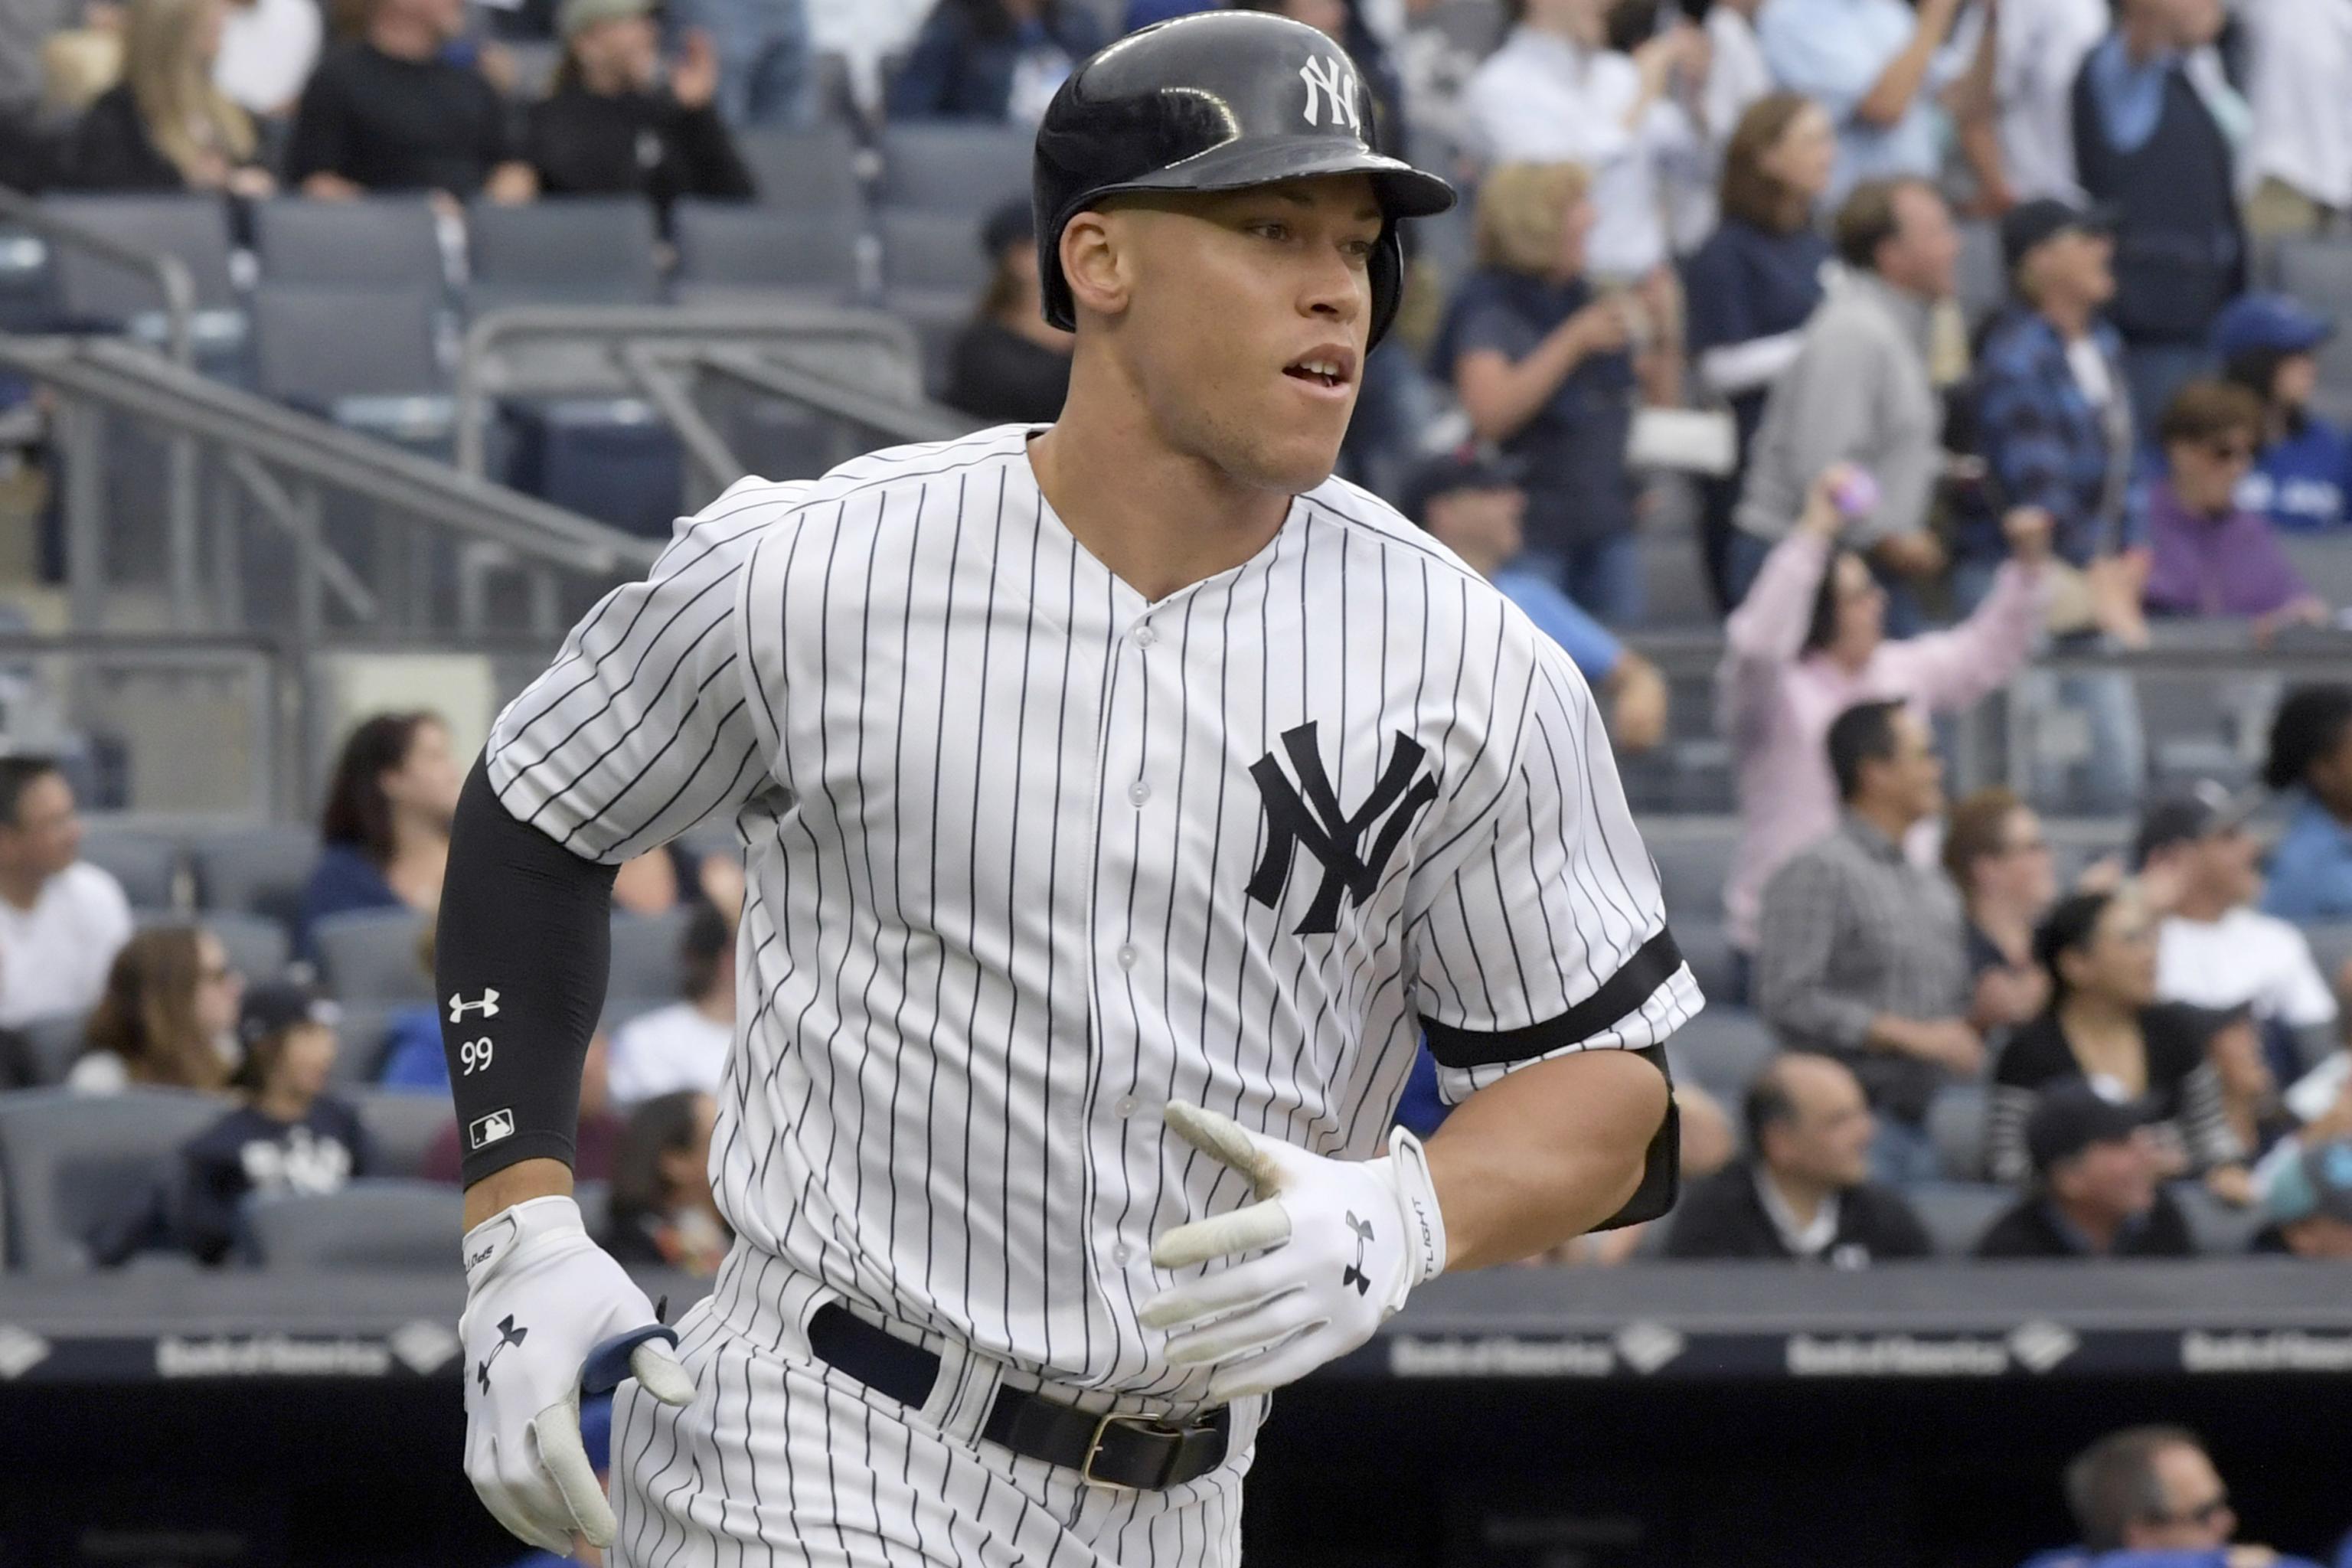 Aaron Judge sold more jerseys than any MLB player in 2017